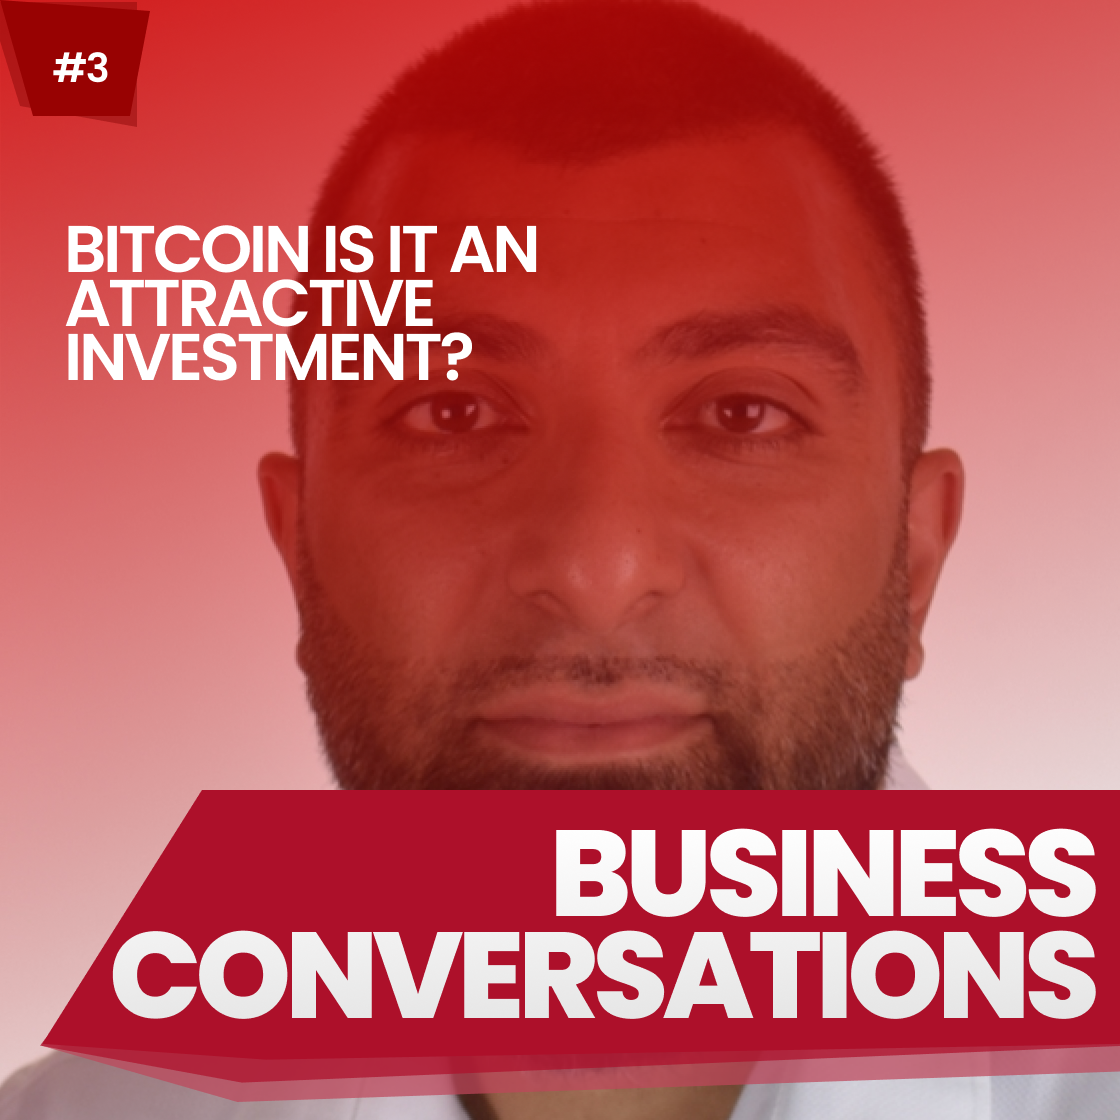 Bitcoin is it an Attractive Investment?